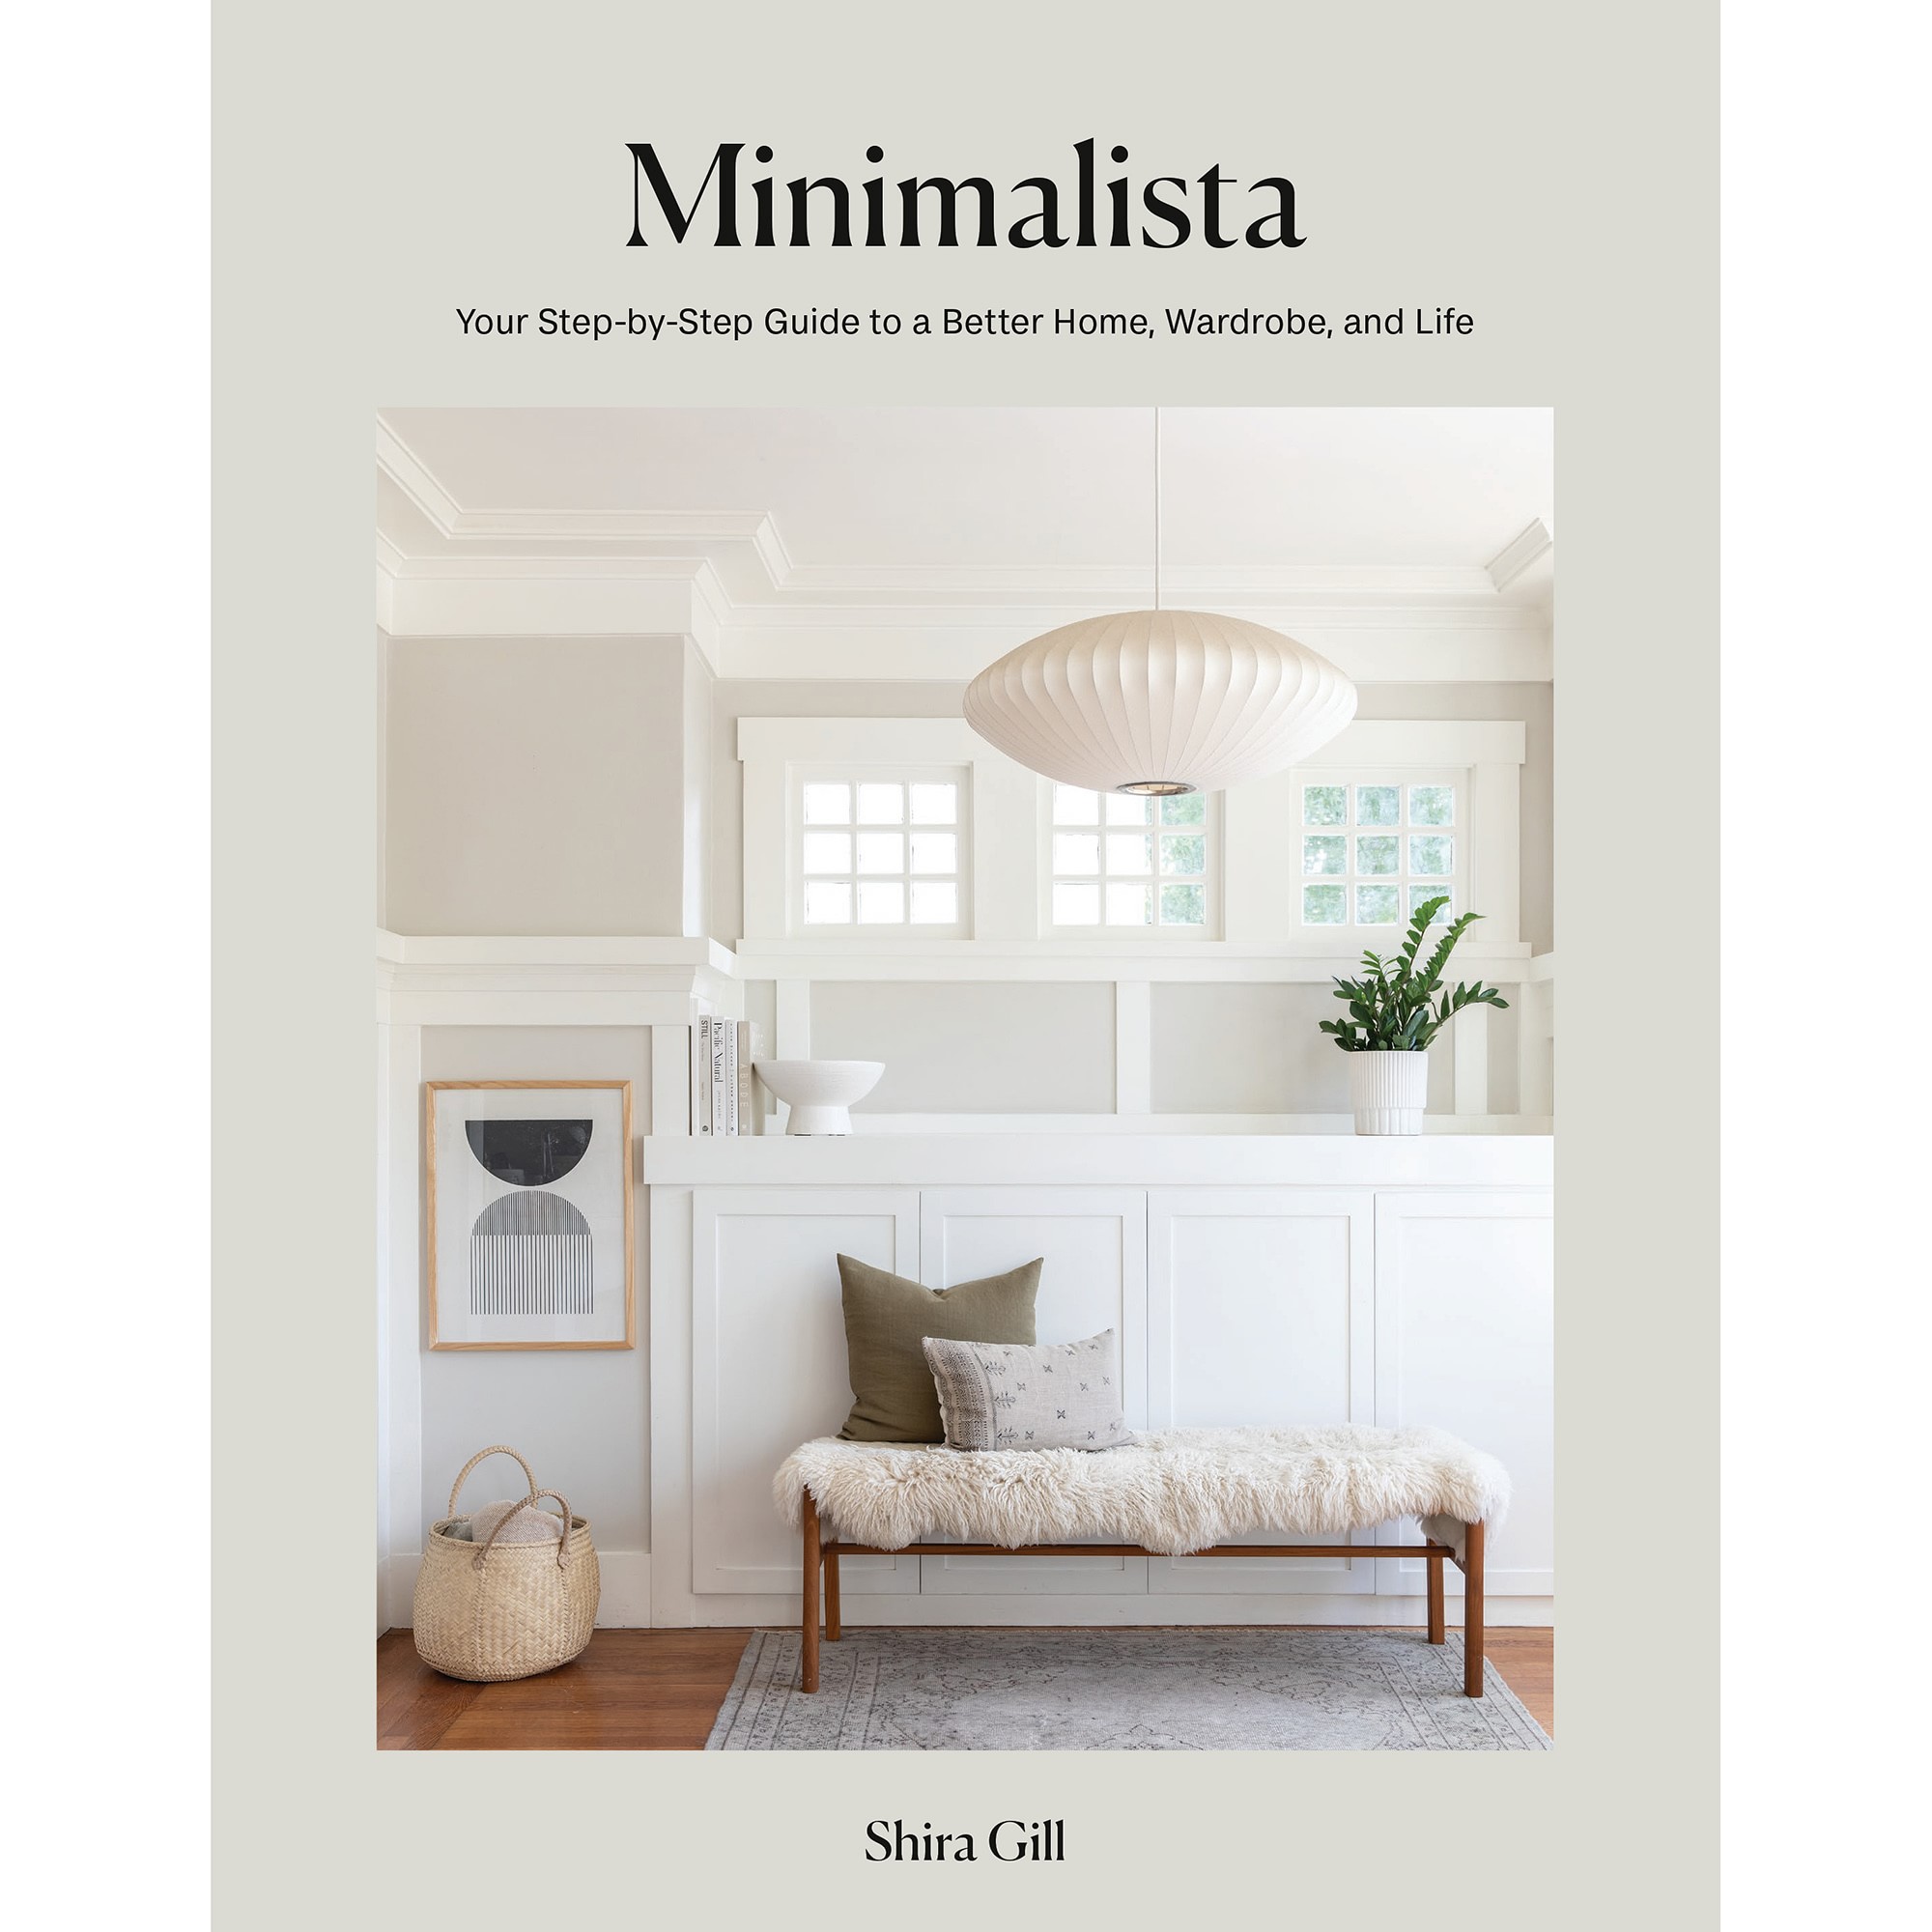 Shira Gill: Minimalista: Your Step-by-Step Guide to a Better Home, Wardrobe, and Life